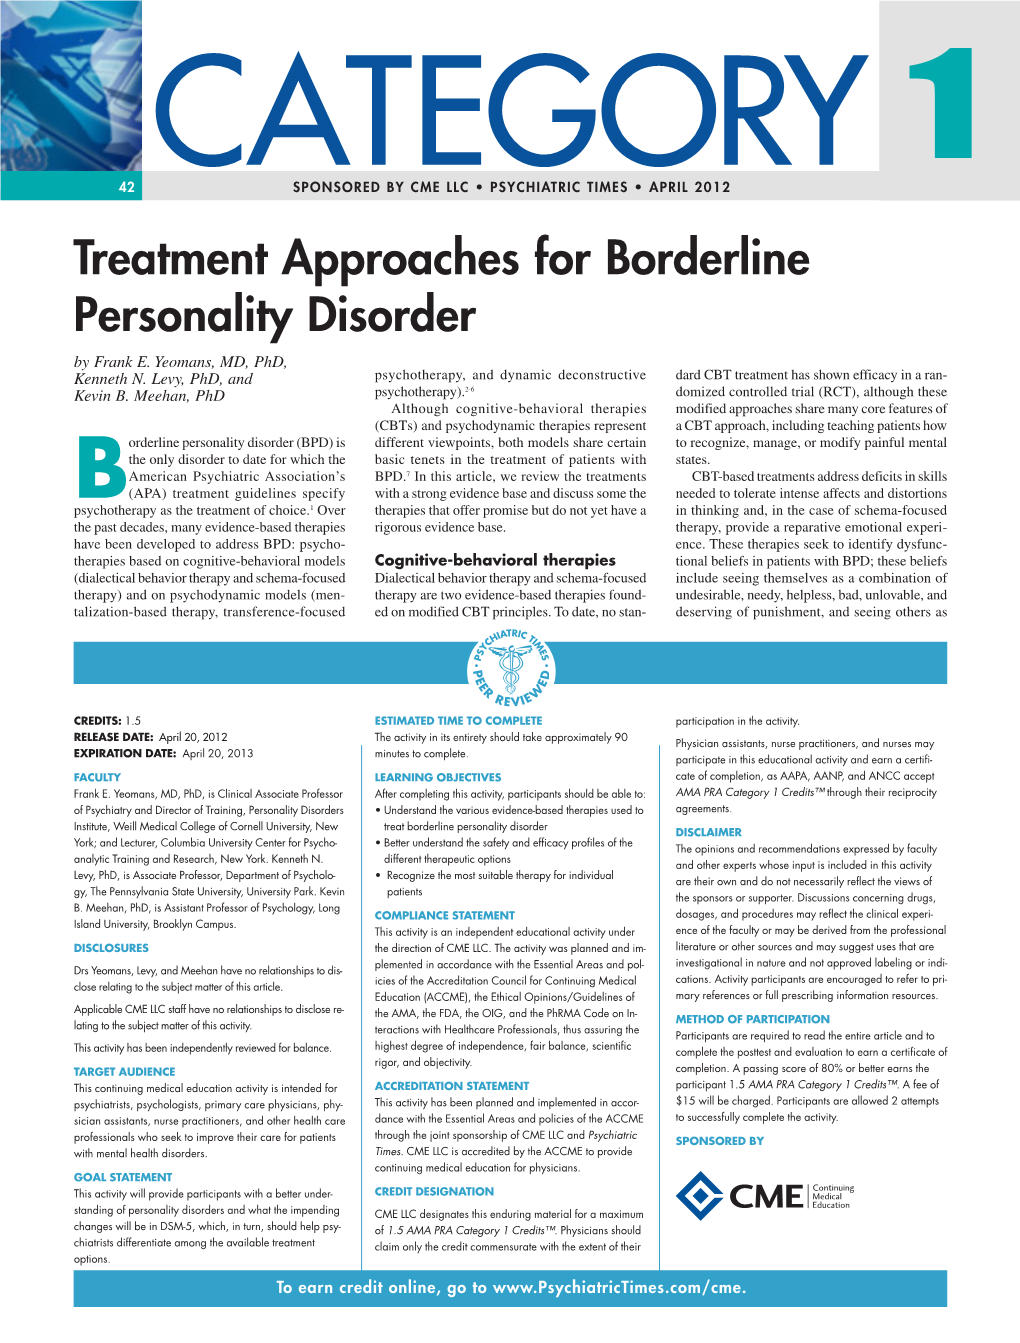 Treatment Approaches for Borderline Personality Disorder by Frank E